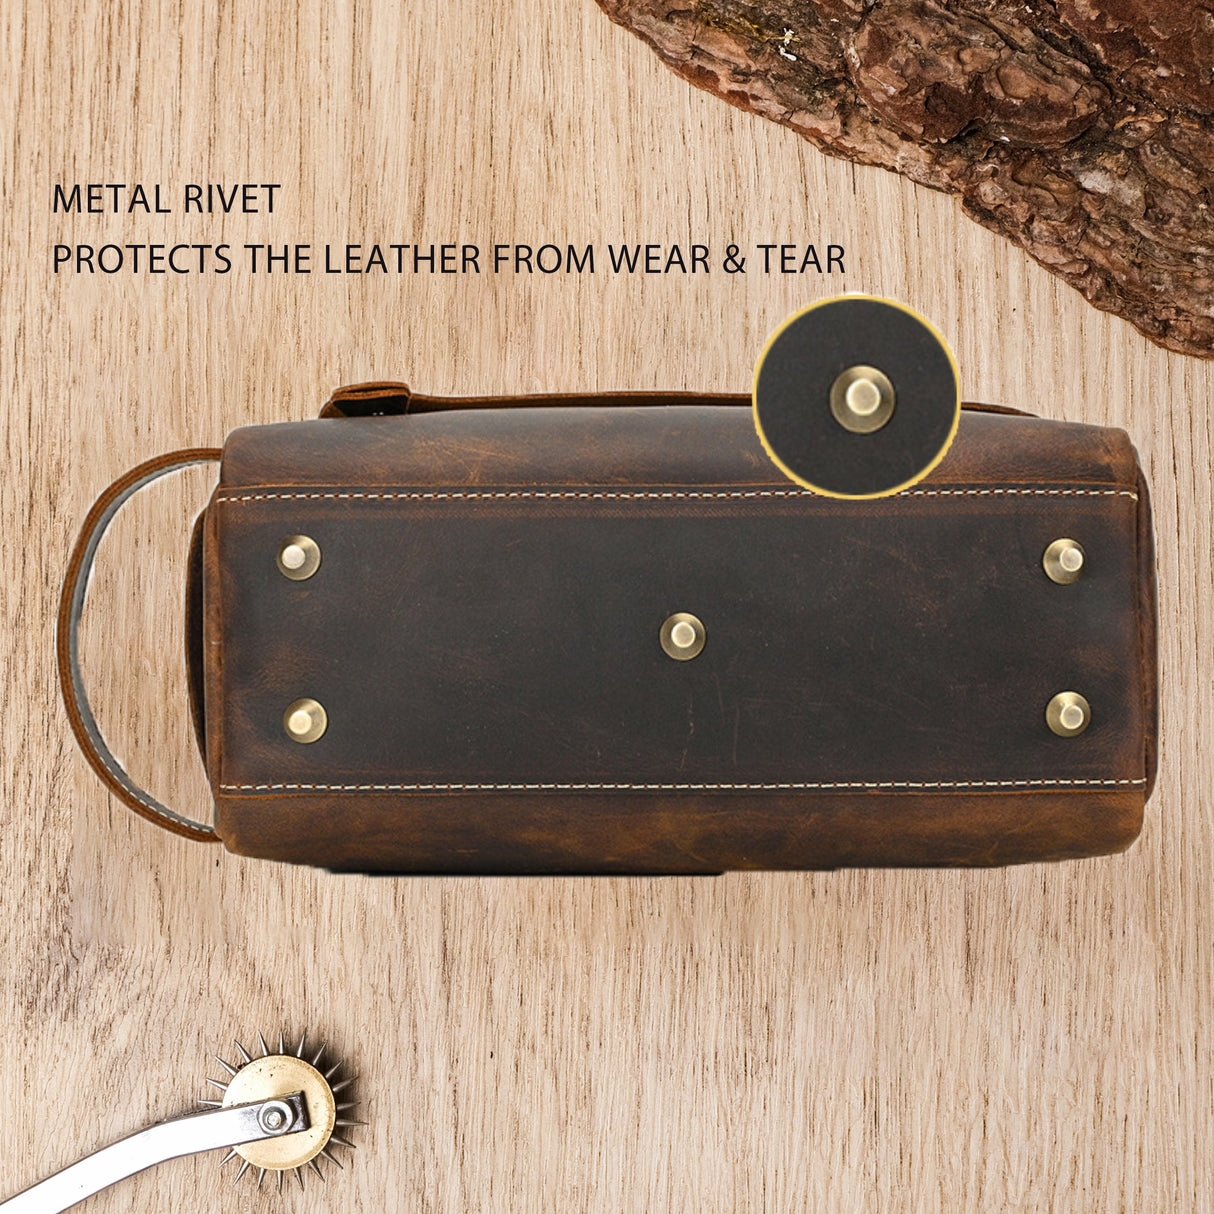 GEX Personalized Waterproof Leather Toiletry Bag - GexWorldwide